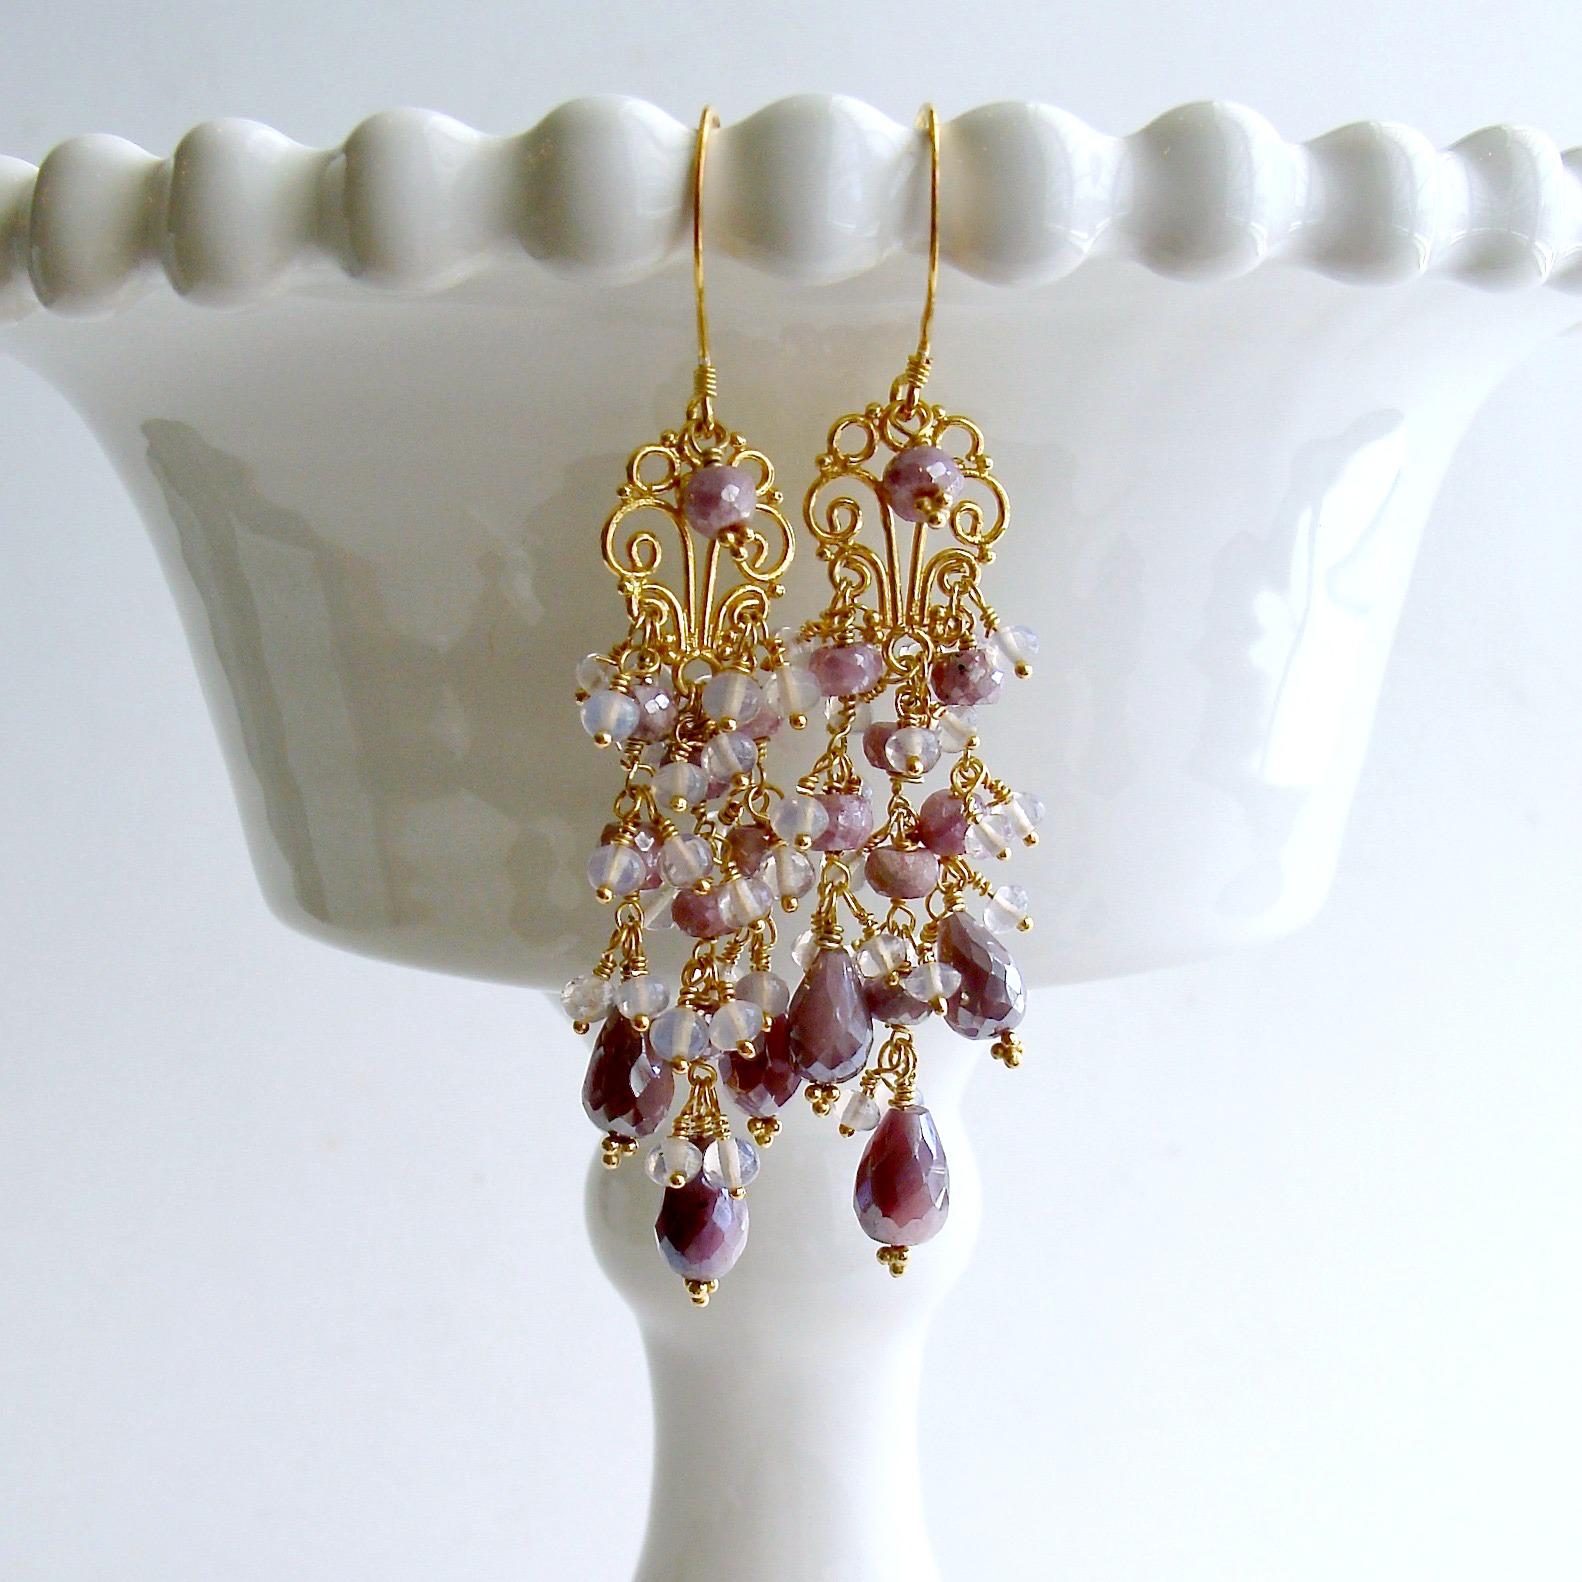 Triple strands of lavender silverite rondelles conclude with chatoyant faceted  teardrops of lavender silverite from gold vermeil filigree connectors.  These delicate strands have been festooned with hand-linked smooth rondelles of coordinating